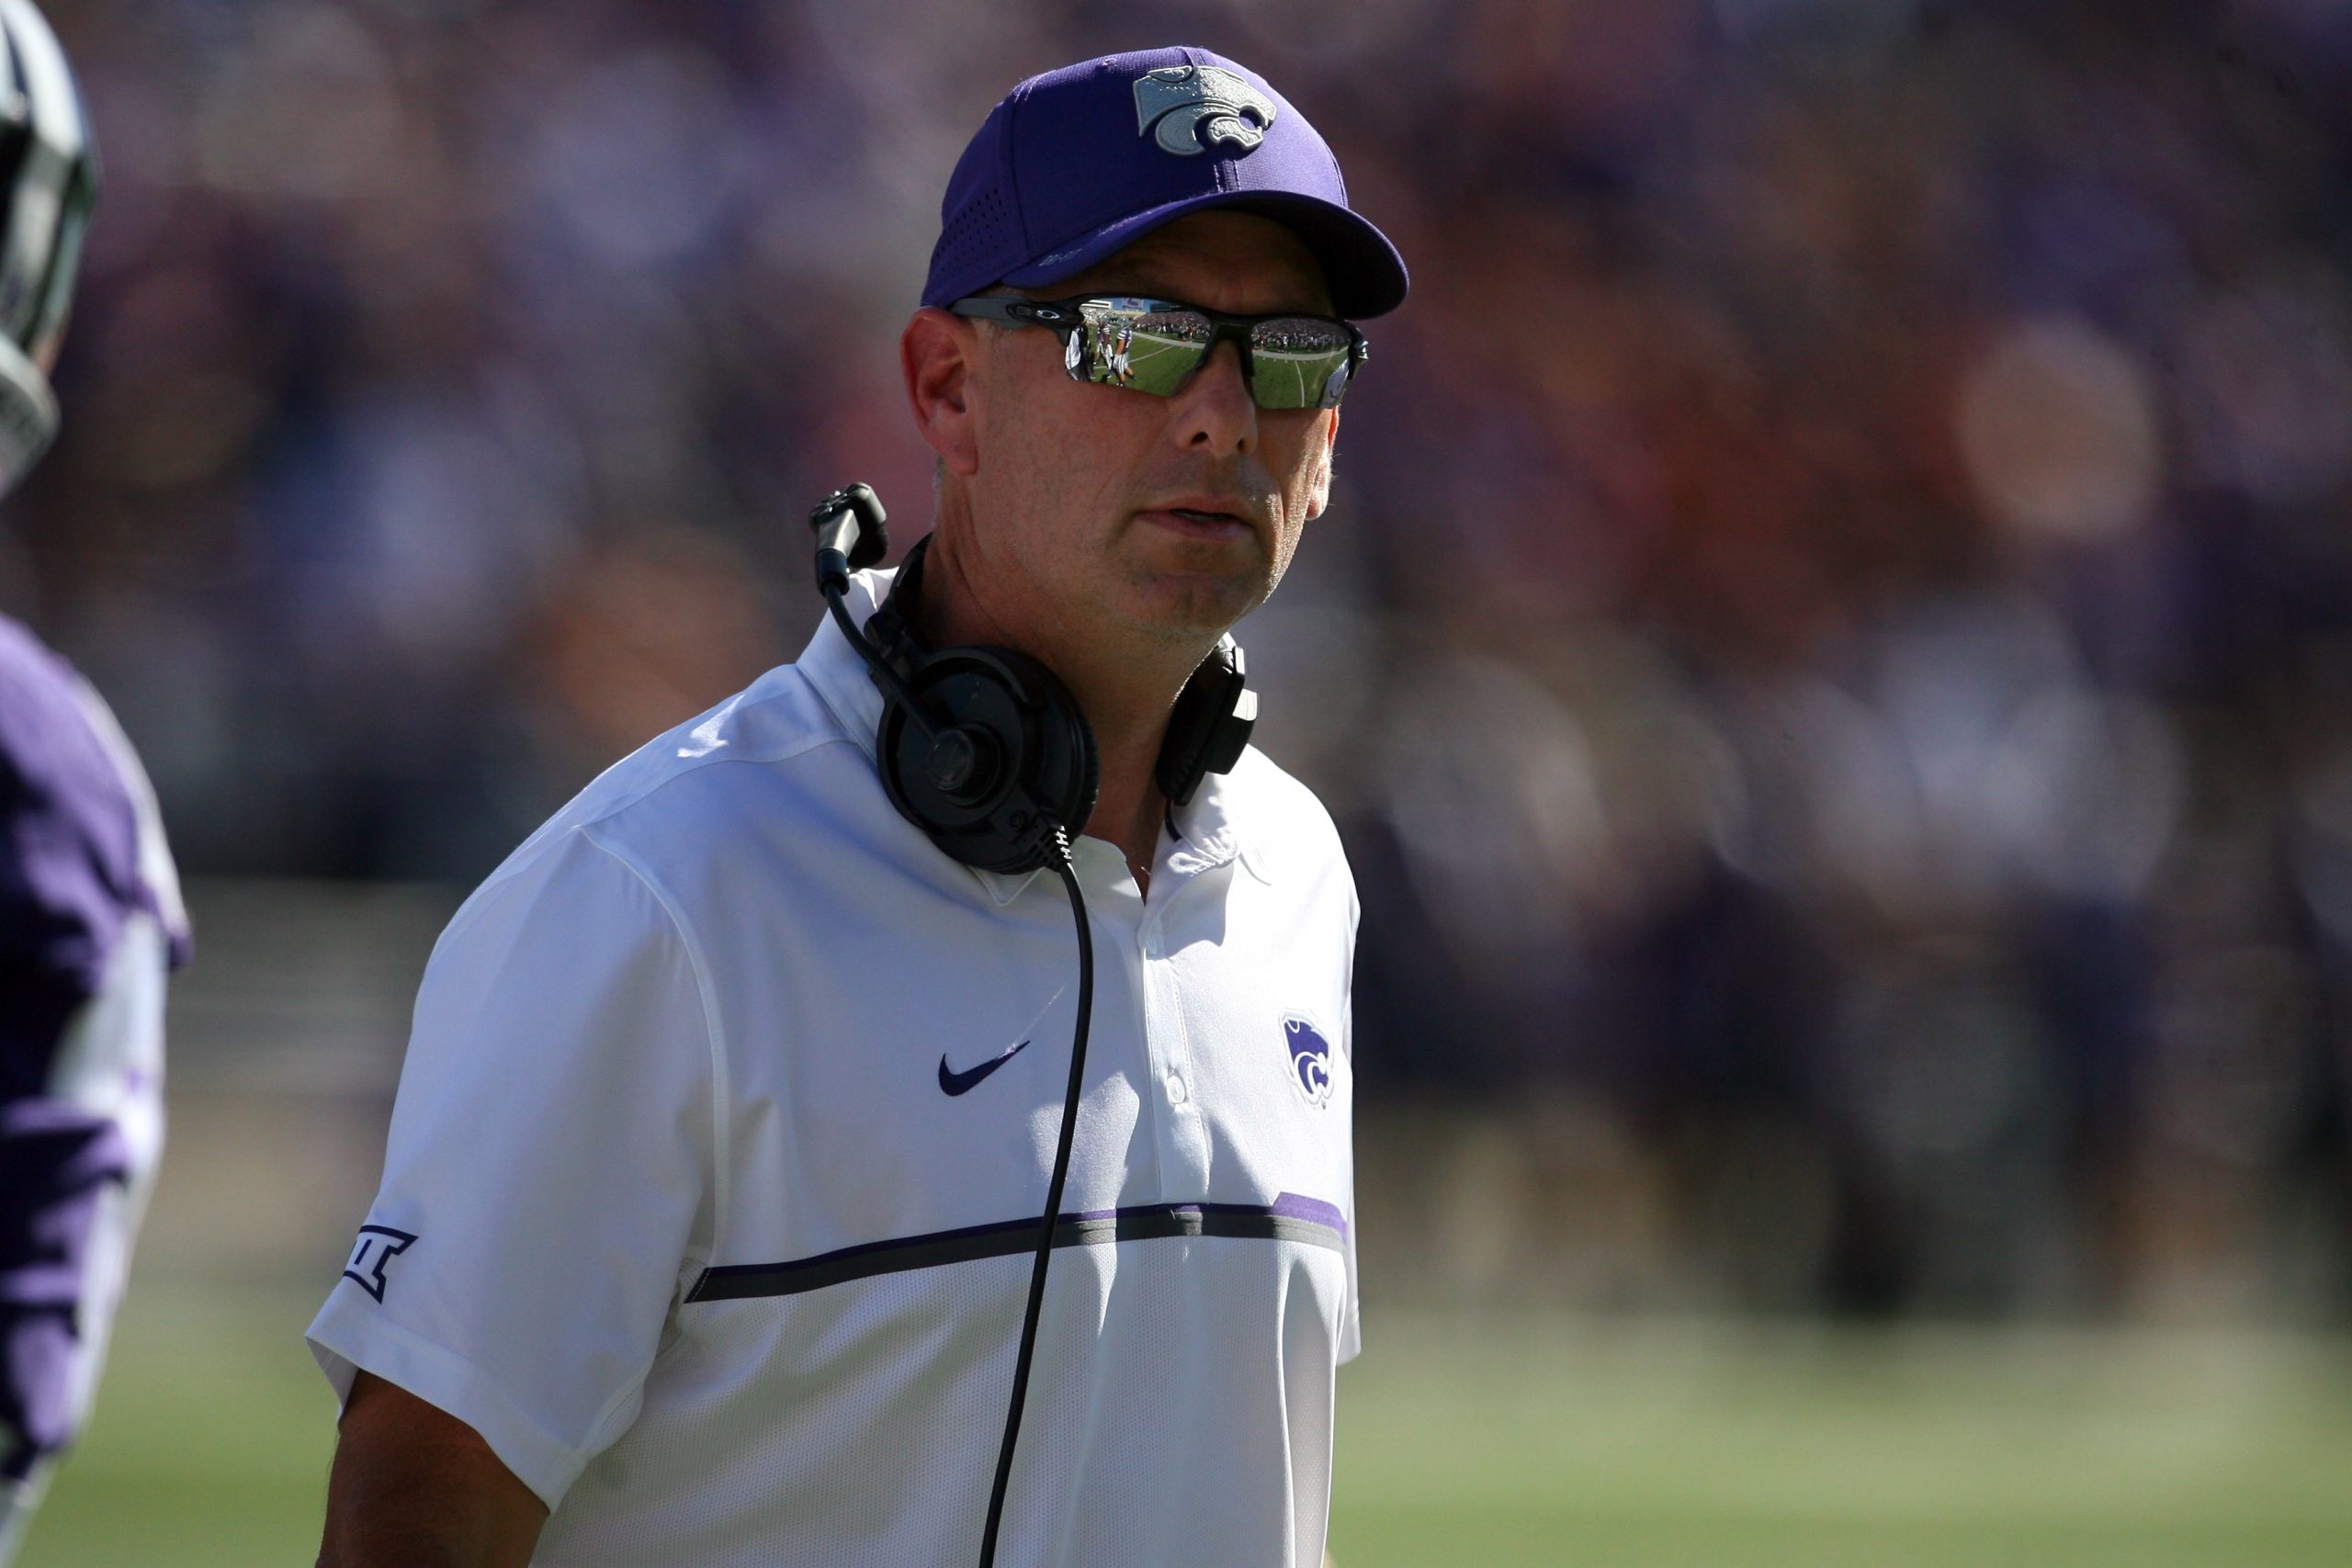 Sean Snyder Sees Reunion With Bret Bielema at Illinois in 2022 “as an opportunity to learn”